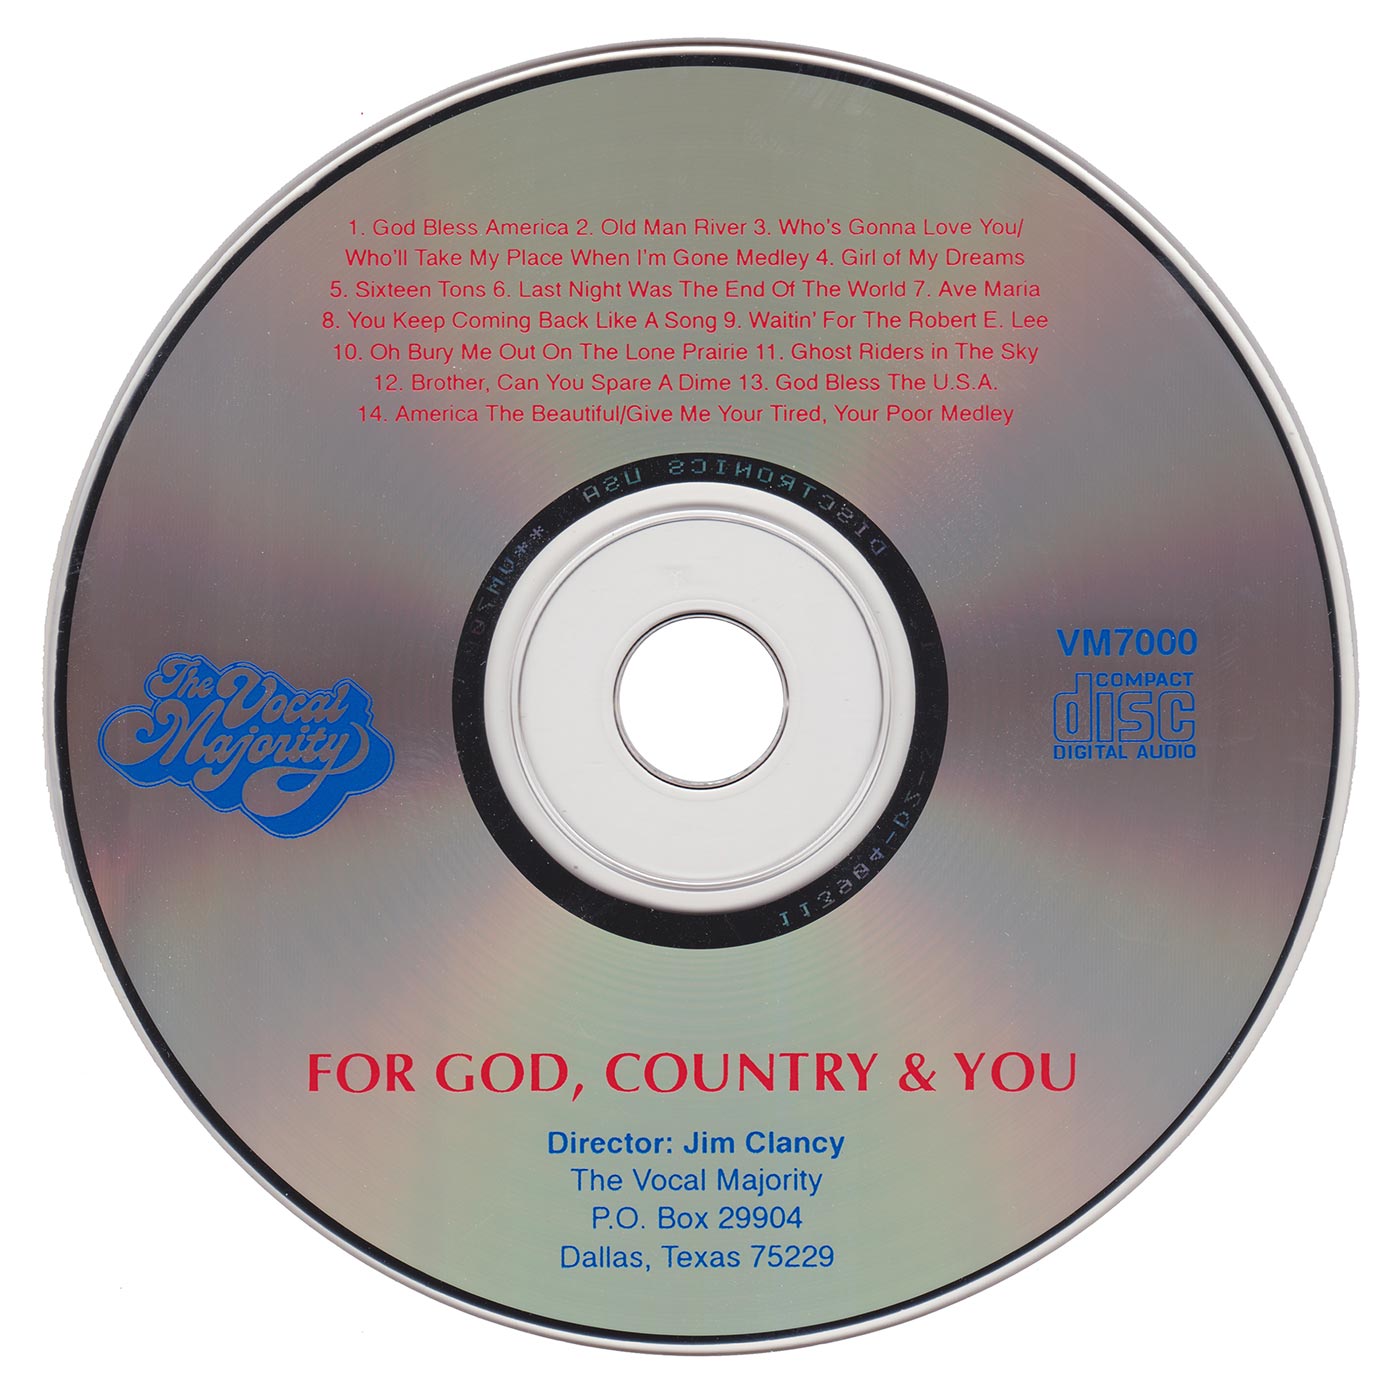 Disc Art: For God, Country, and You